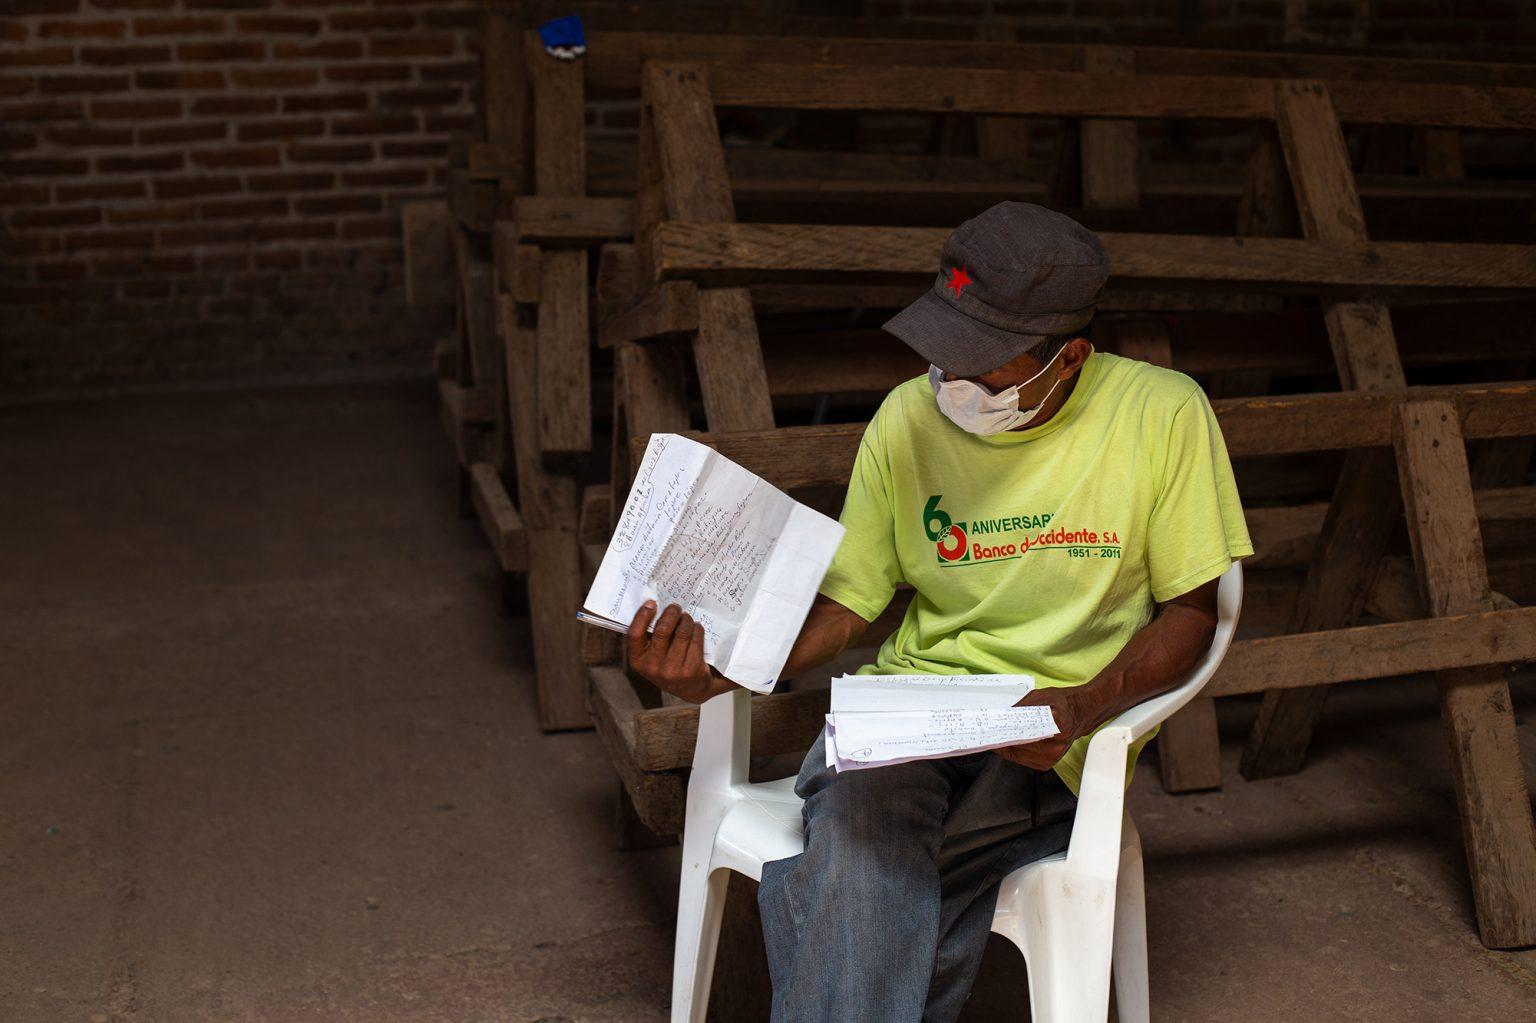 A community leader revises a list of people benefiting from the project coordinated by the Red Cross. Opatoro, La Paz, August 8 2020. Photo: Martín Cálix